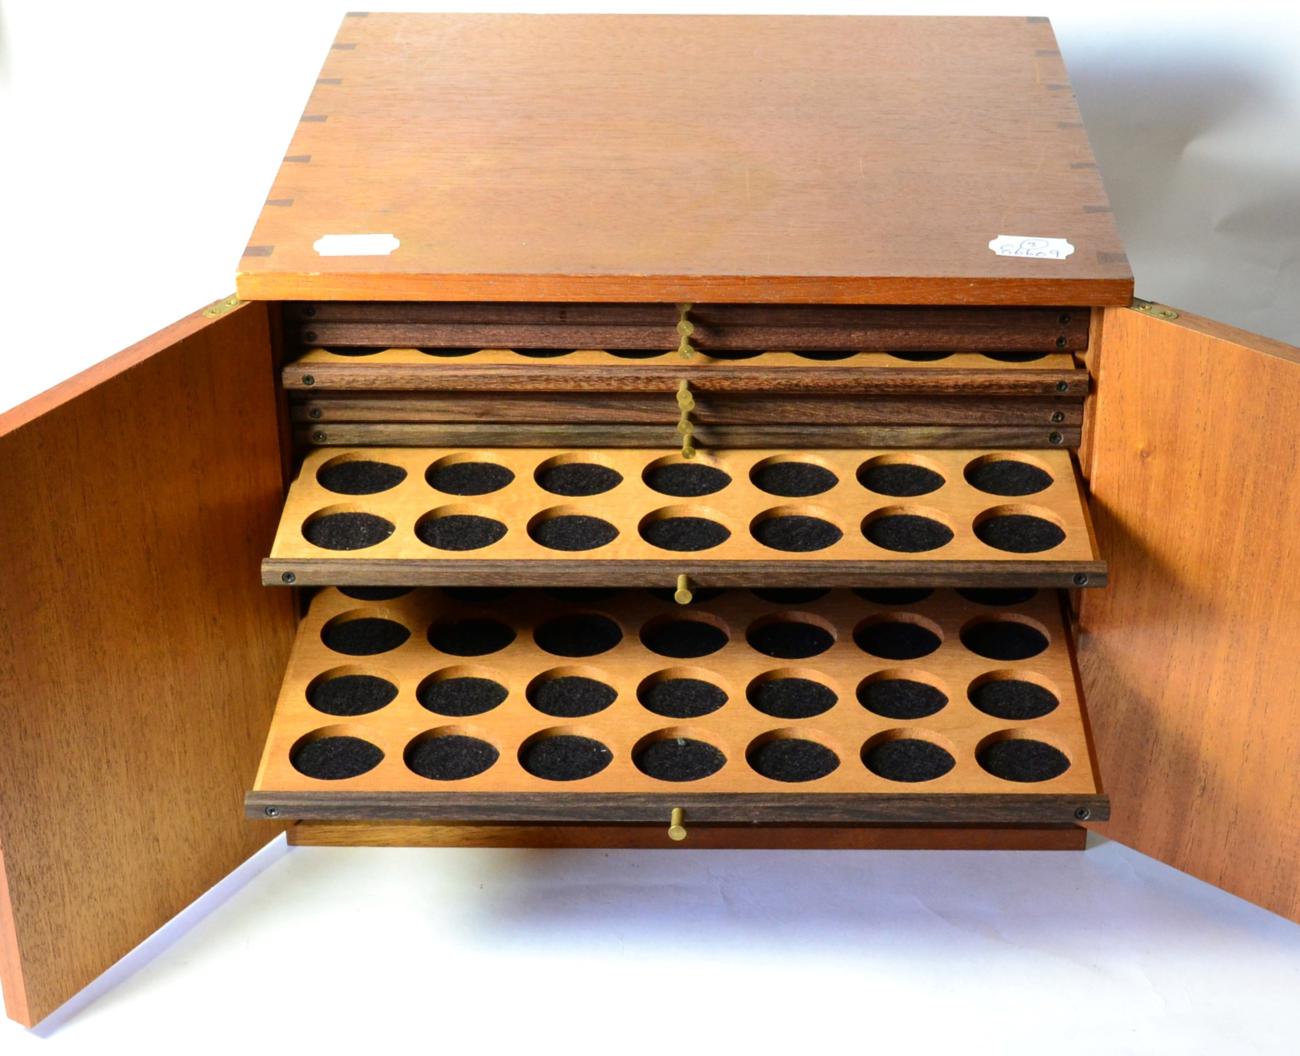 A Mahogany Coin Cabinet, 32.5cm x 30cm x 26.5cm, containing 20 trays with double-holed spaces for